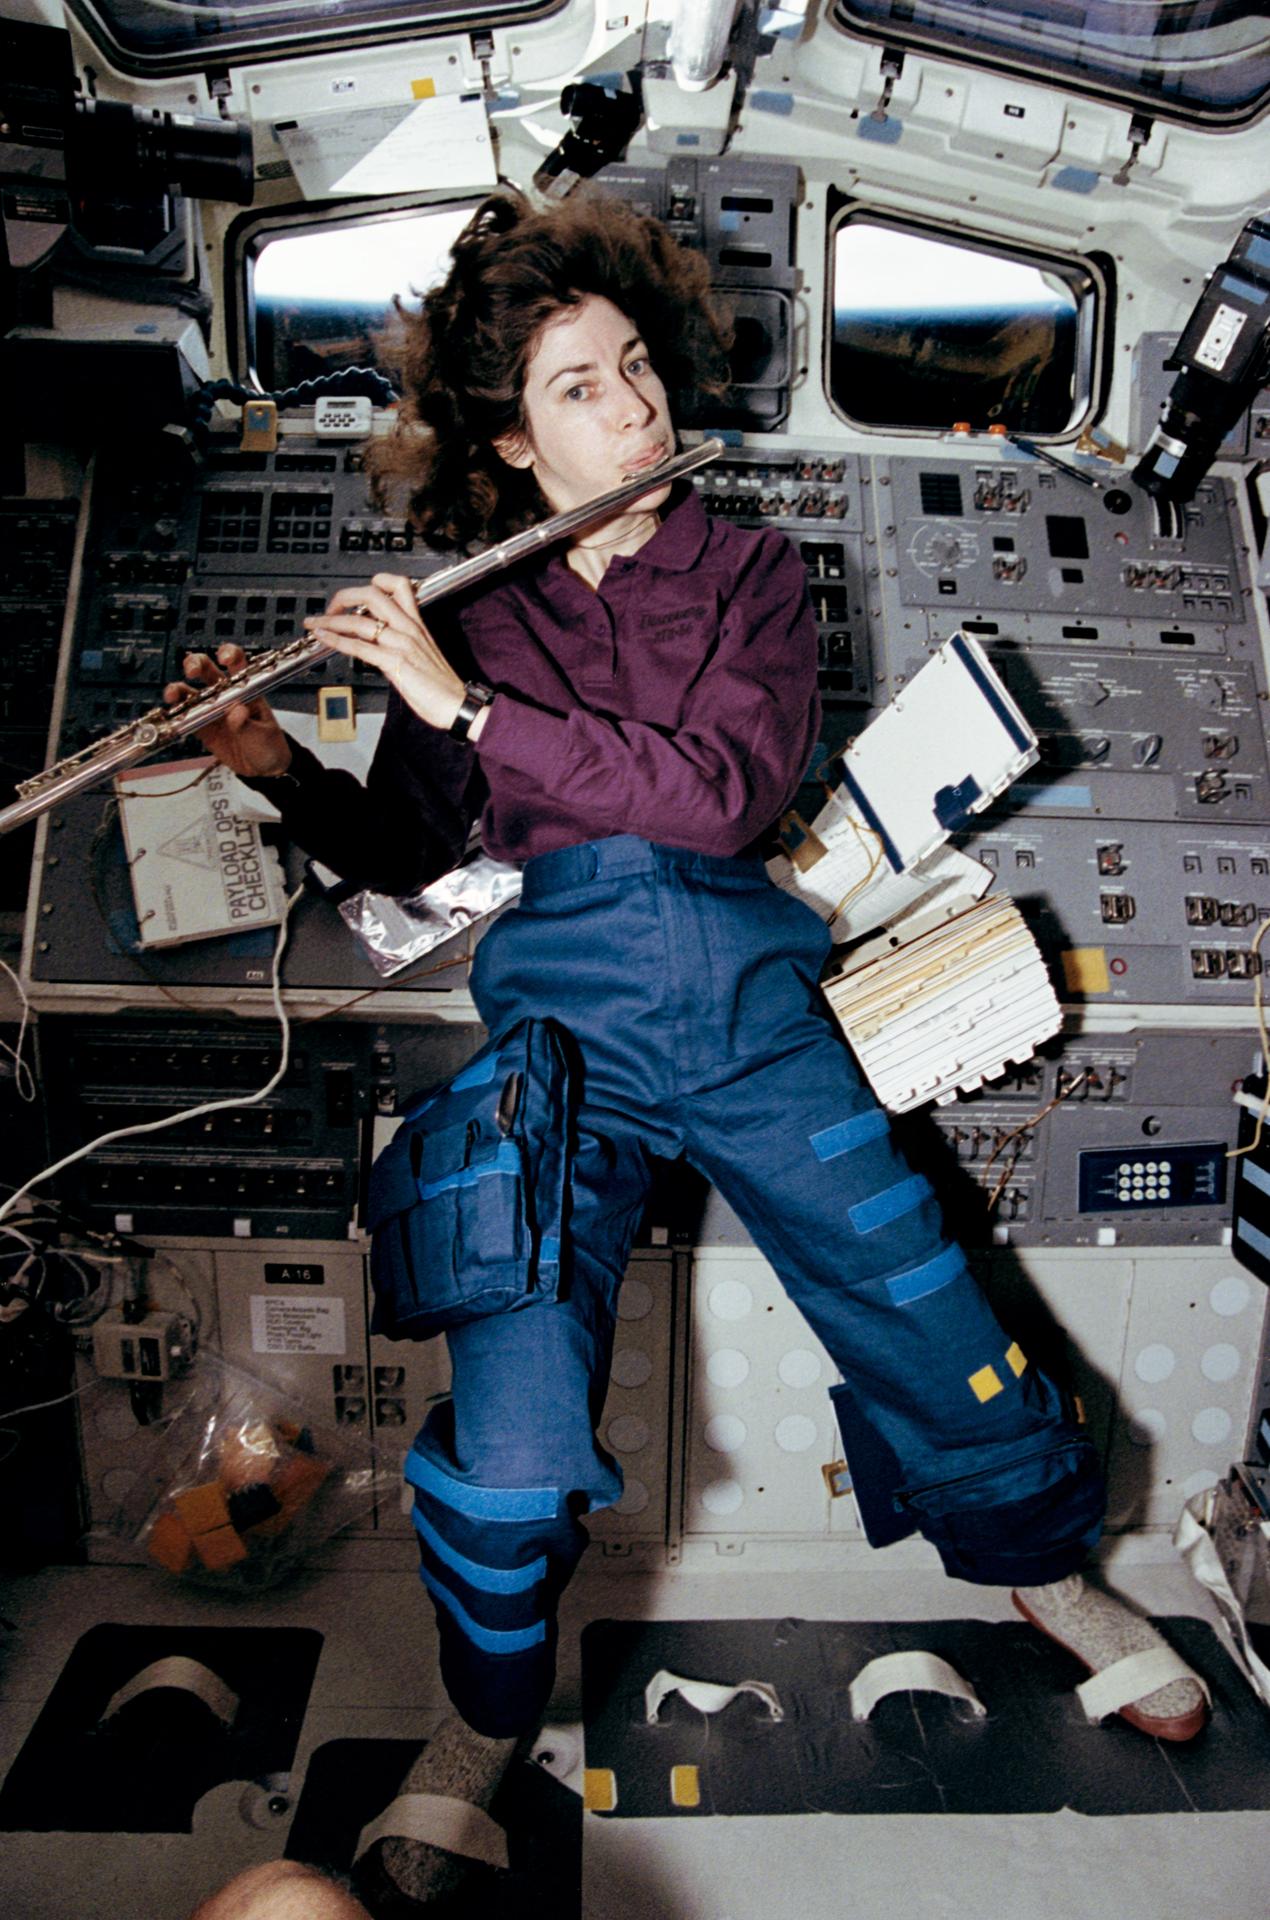 Dr. Ellen Ochoa plays the flute in zero gravity space aboard a NASA spacecraft with books and other objects floating around her on April 17, 1993. Her feet are strapped to the ground.